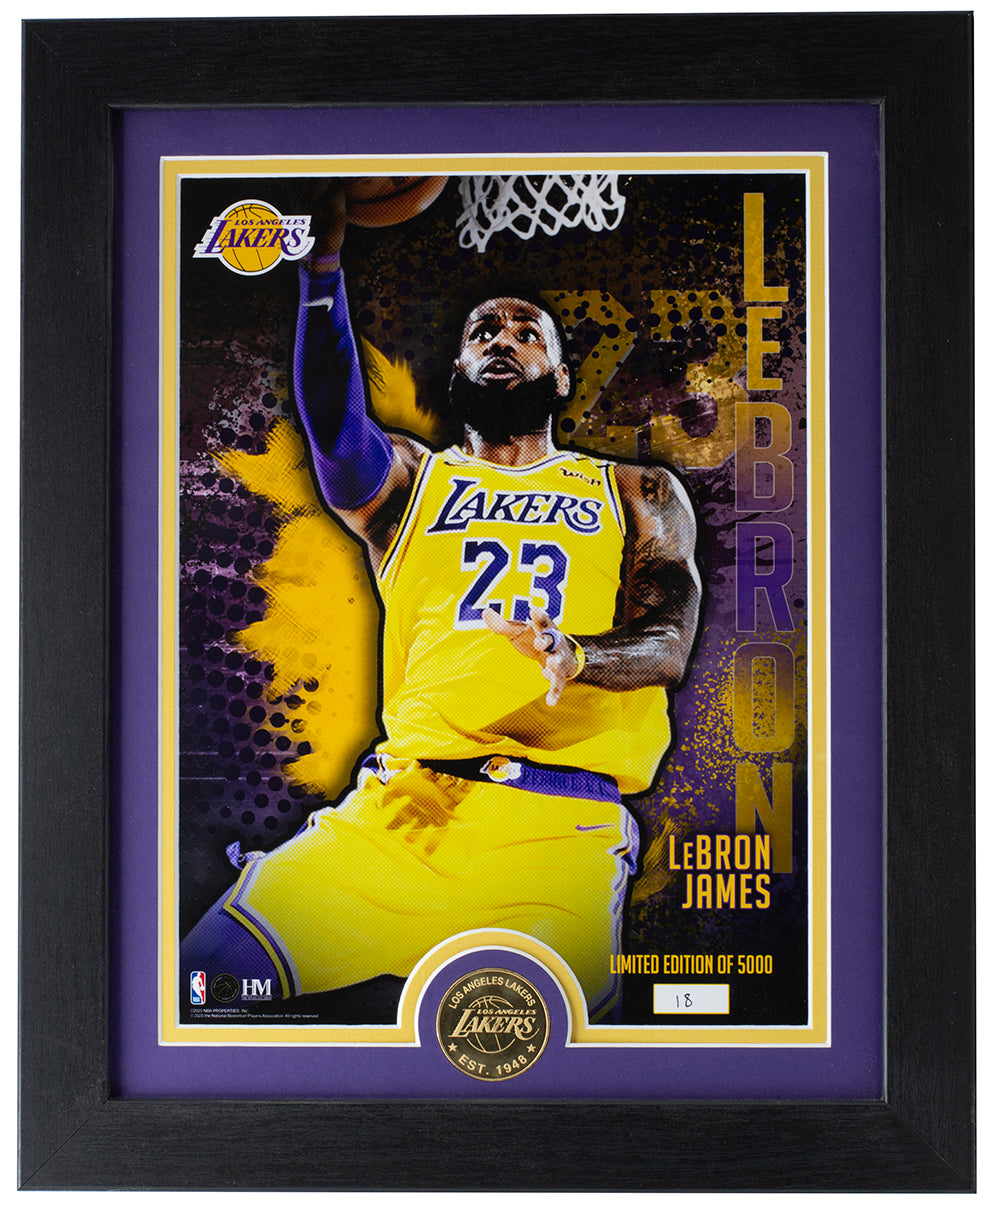 LEBRON JAMES Lakers #6 Framed 15 x 17 Game Used Basketball